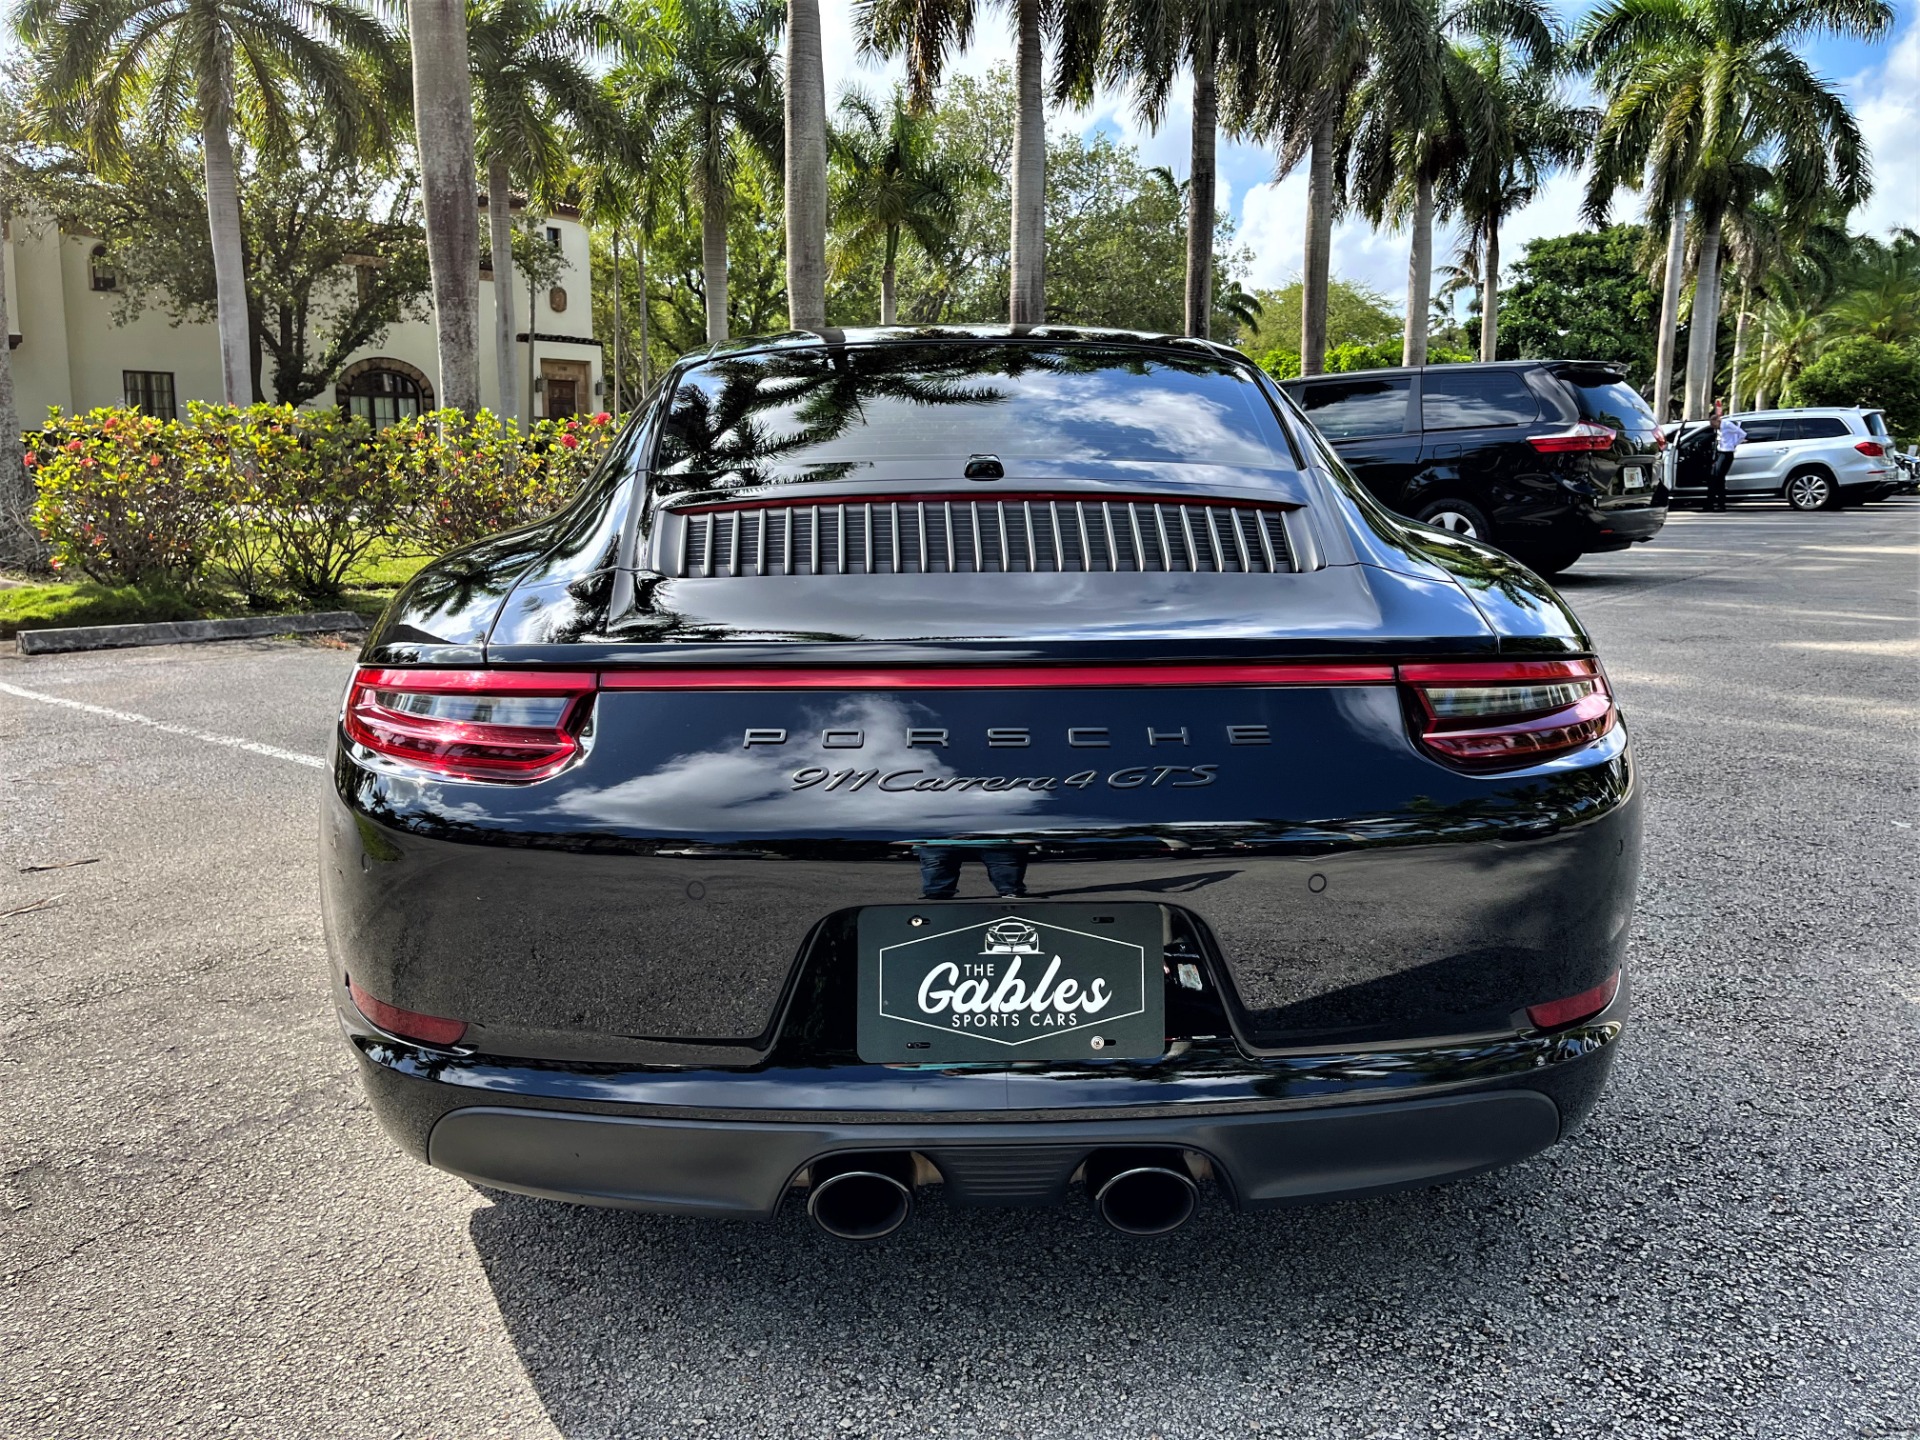 Used 2018 Porsche 911 Carrera 4 GTS for sale $139,850 at The Gables Sports Cars in Miami FL 33146 4